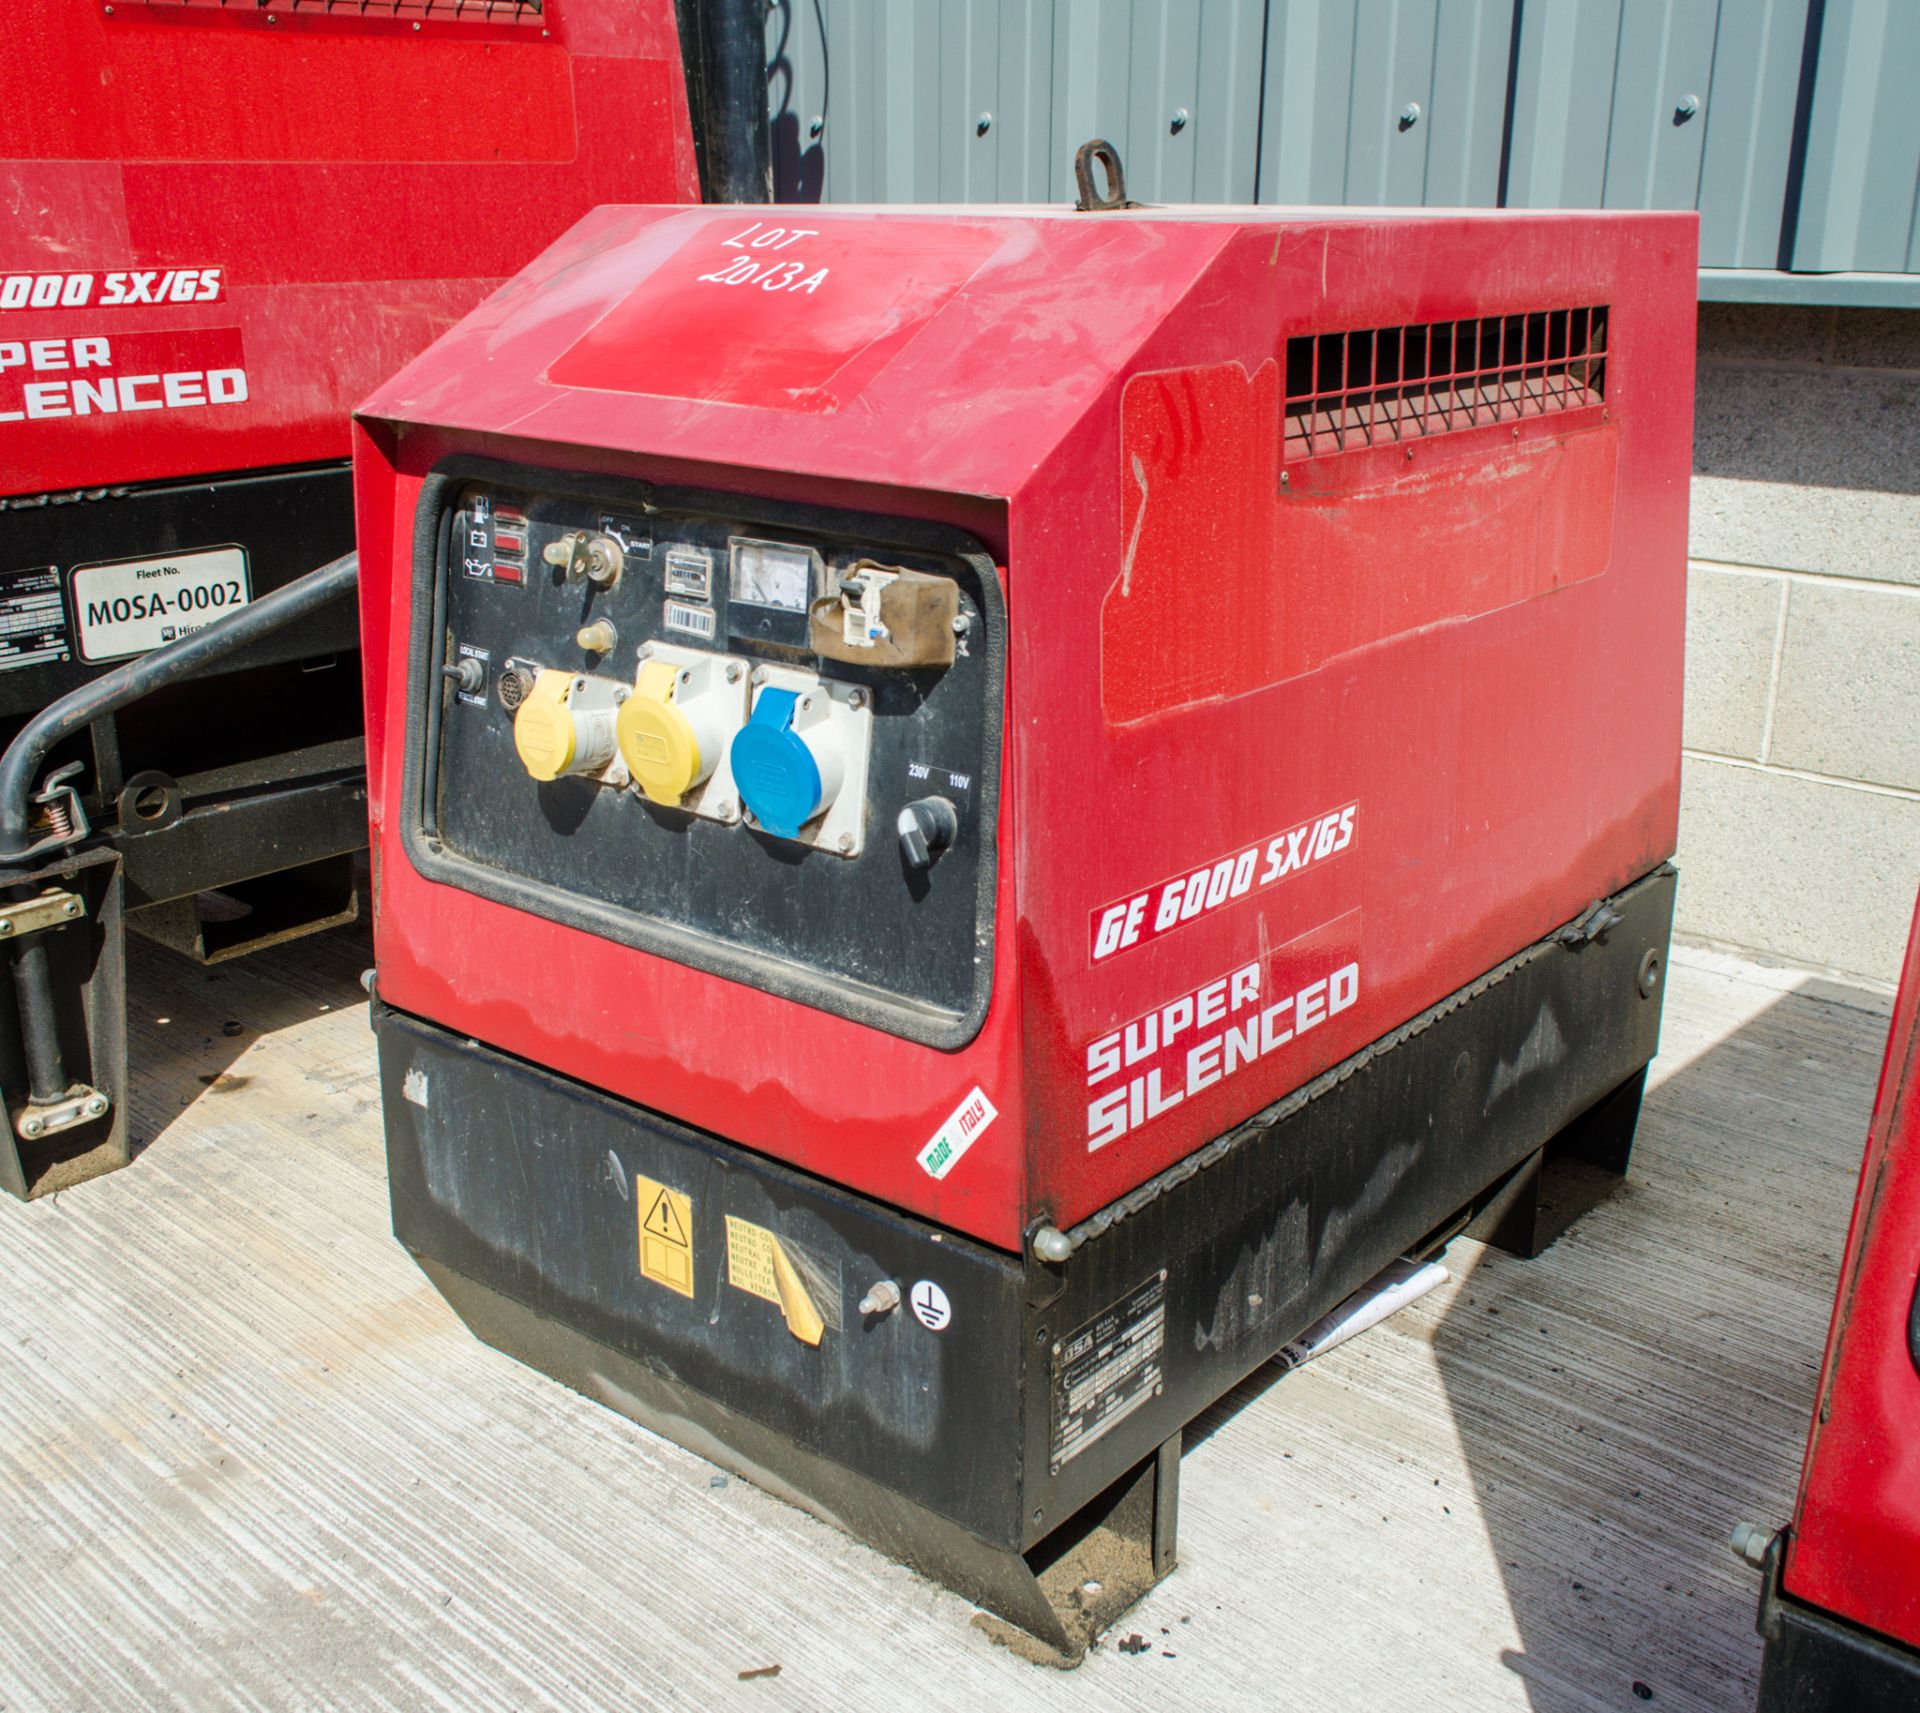 Mosa GE6000 SX/GS diesel driven generator Year: 2015 S/N: 045509 Recorded Hours: 1080